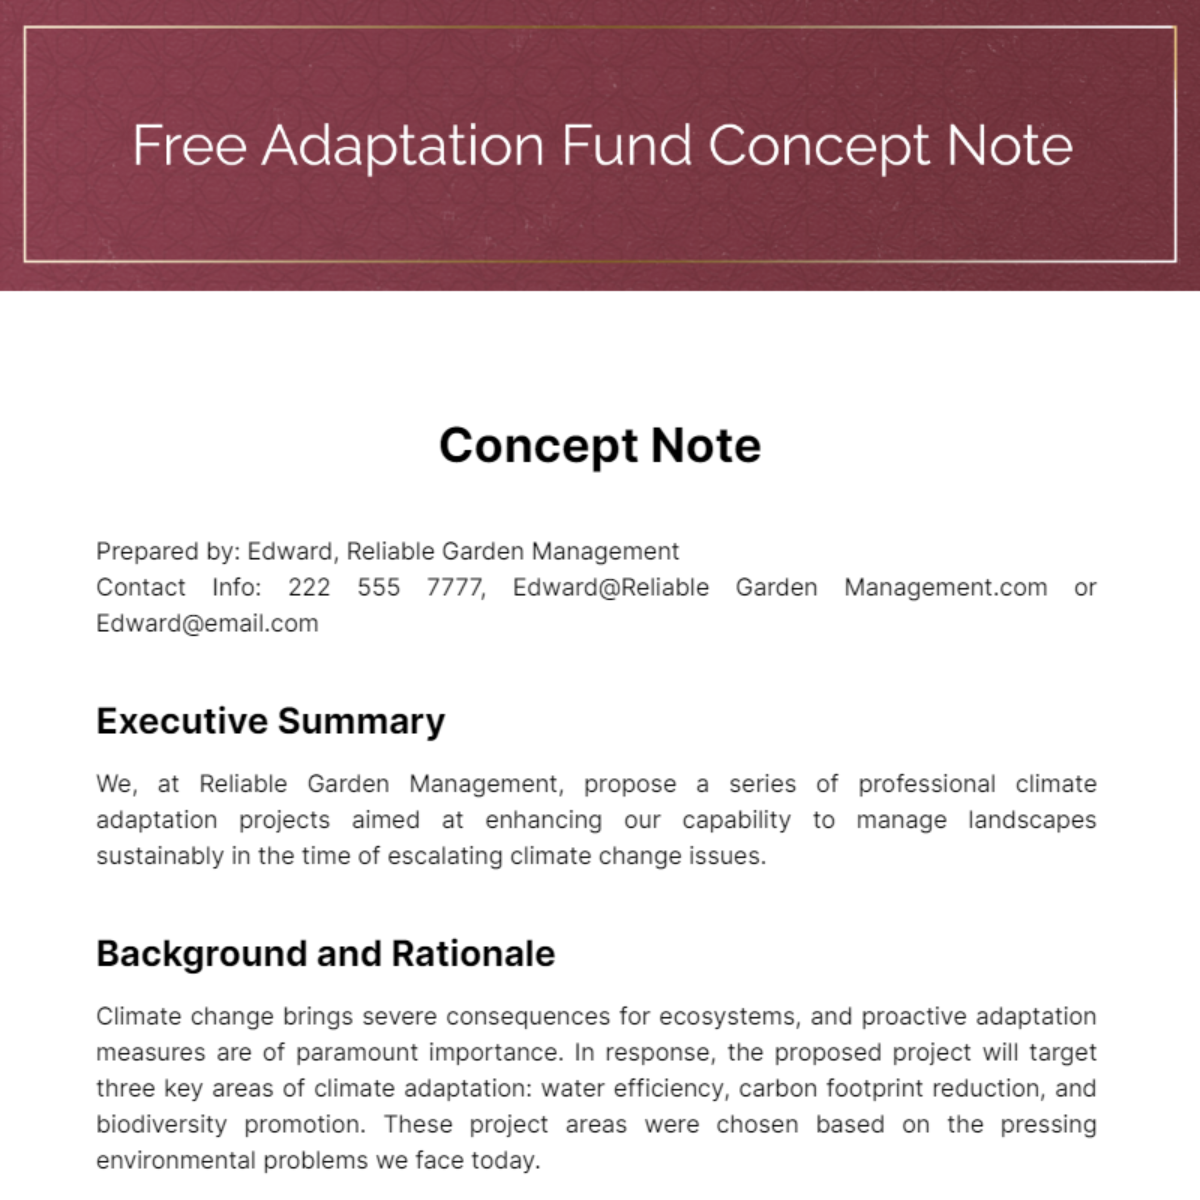 Free Adaptation Fund Concept Note Template